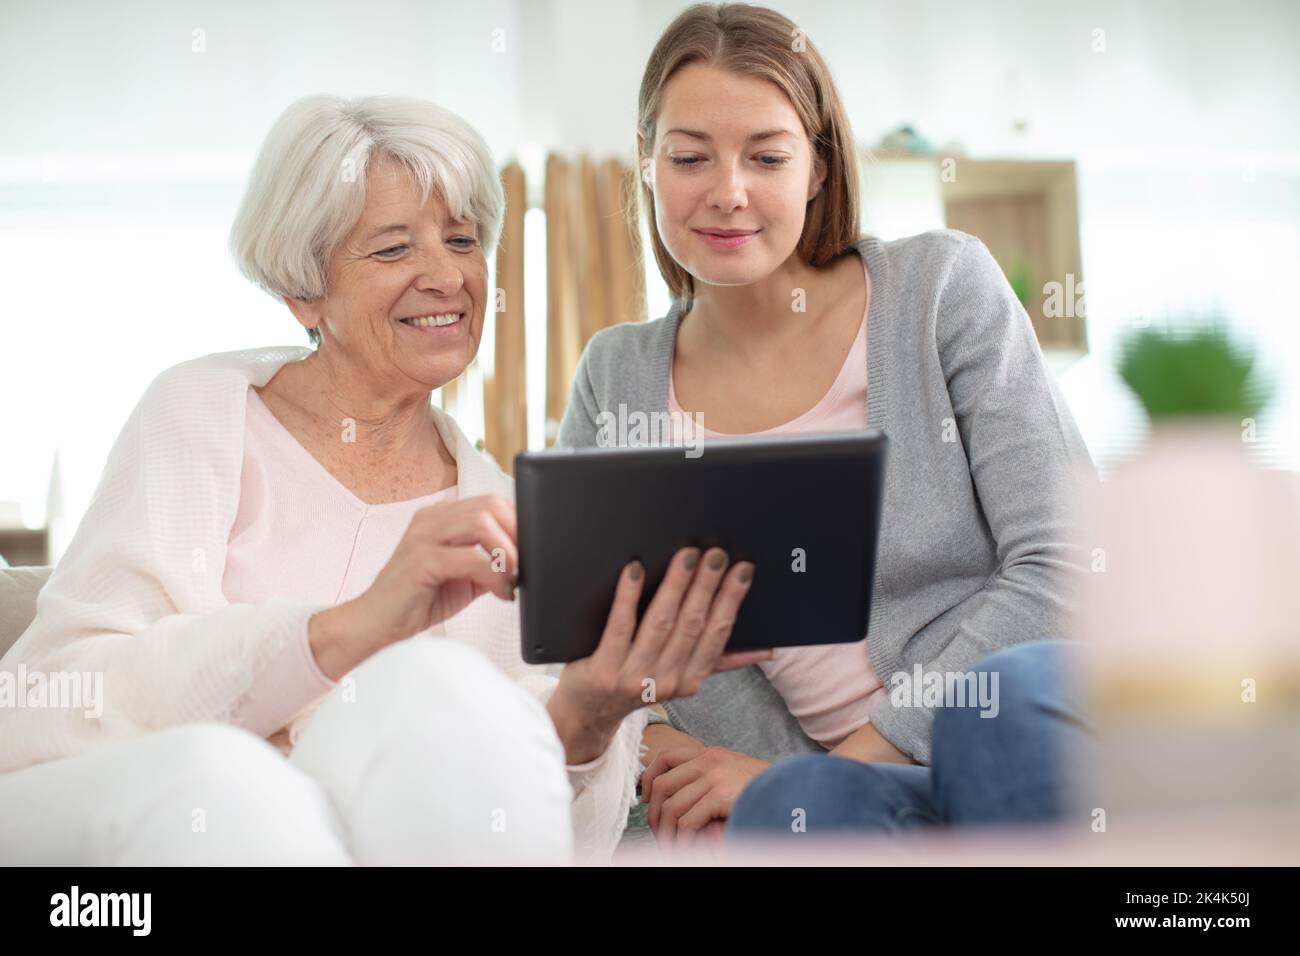 mature mother and her adult daughter using a digital tablet Stock Photo